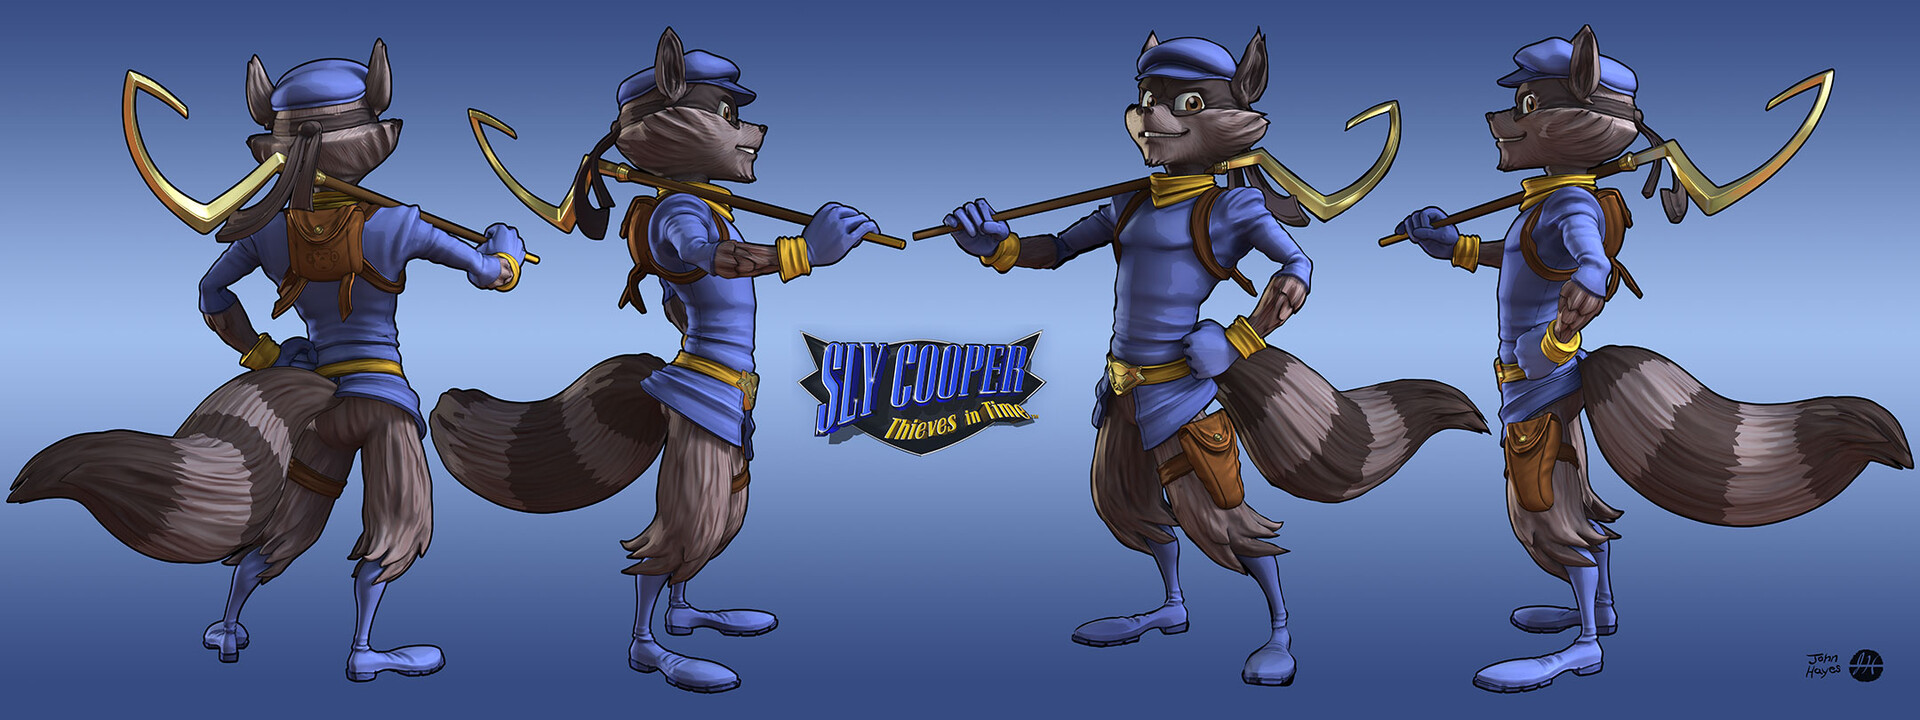 Sly Cooper: Thieves in Time gallery - Polygon